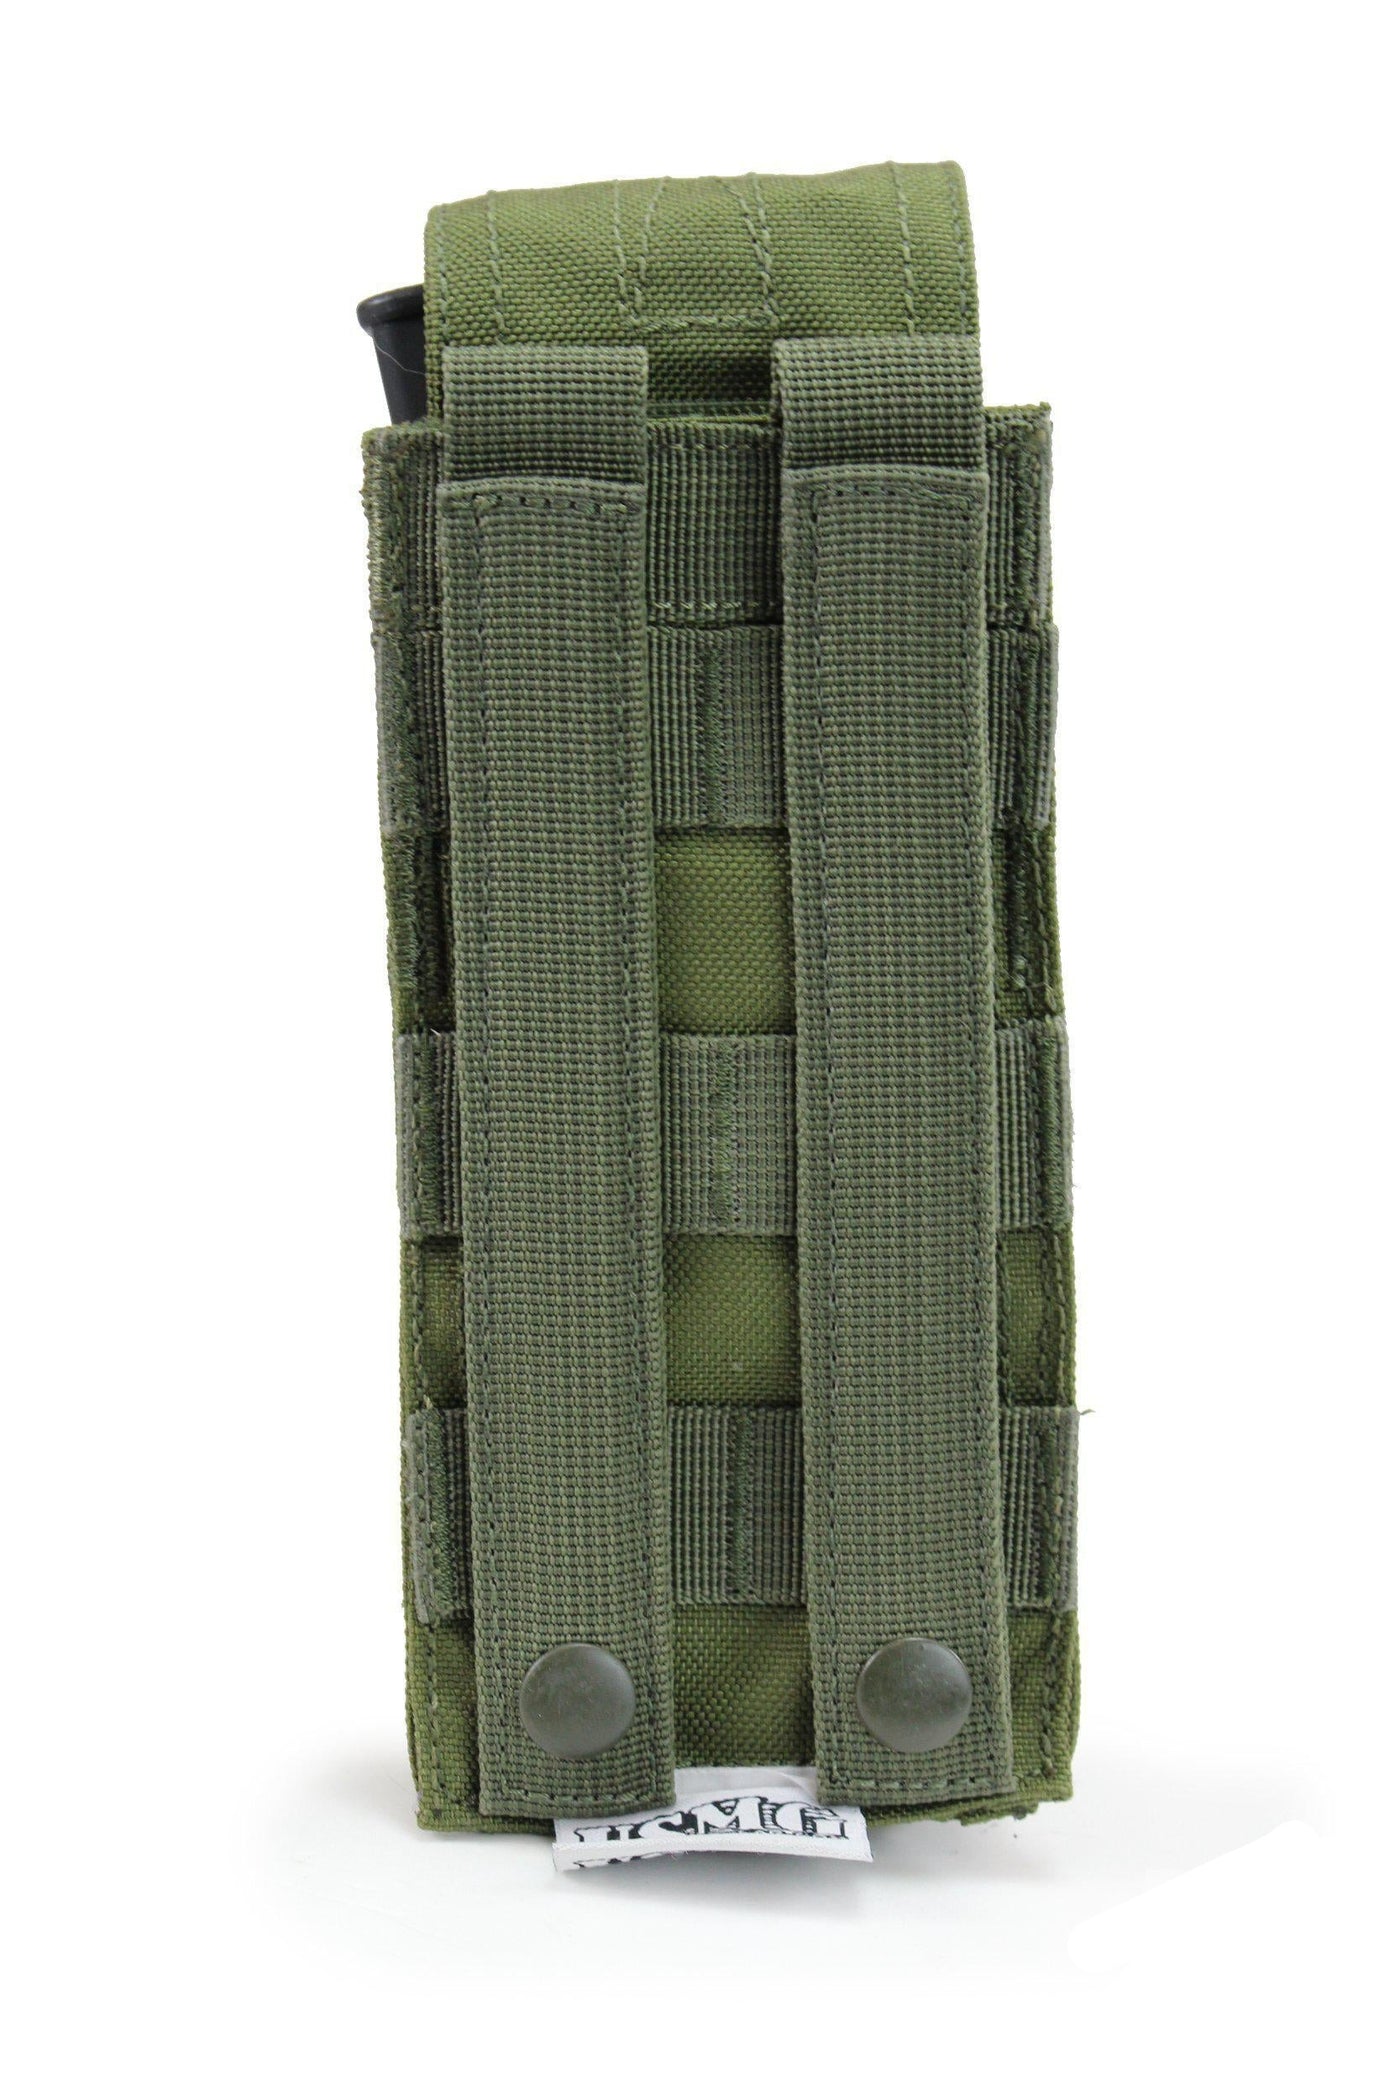 USMG Universal Single Magazine Pouch MOLLE - Olive Drab